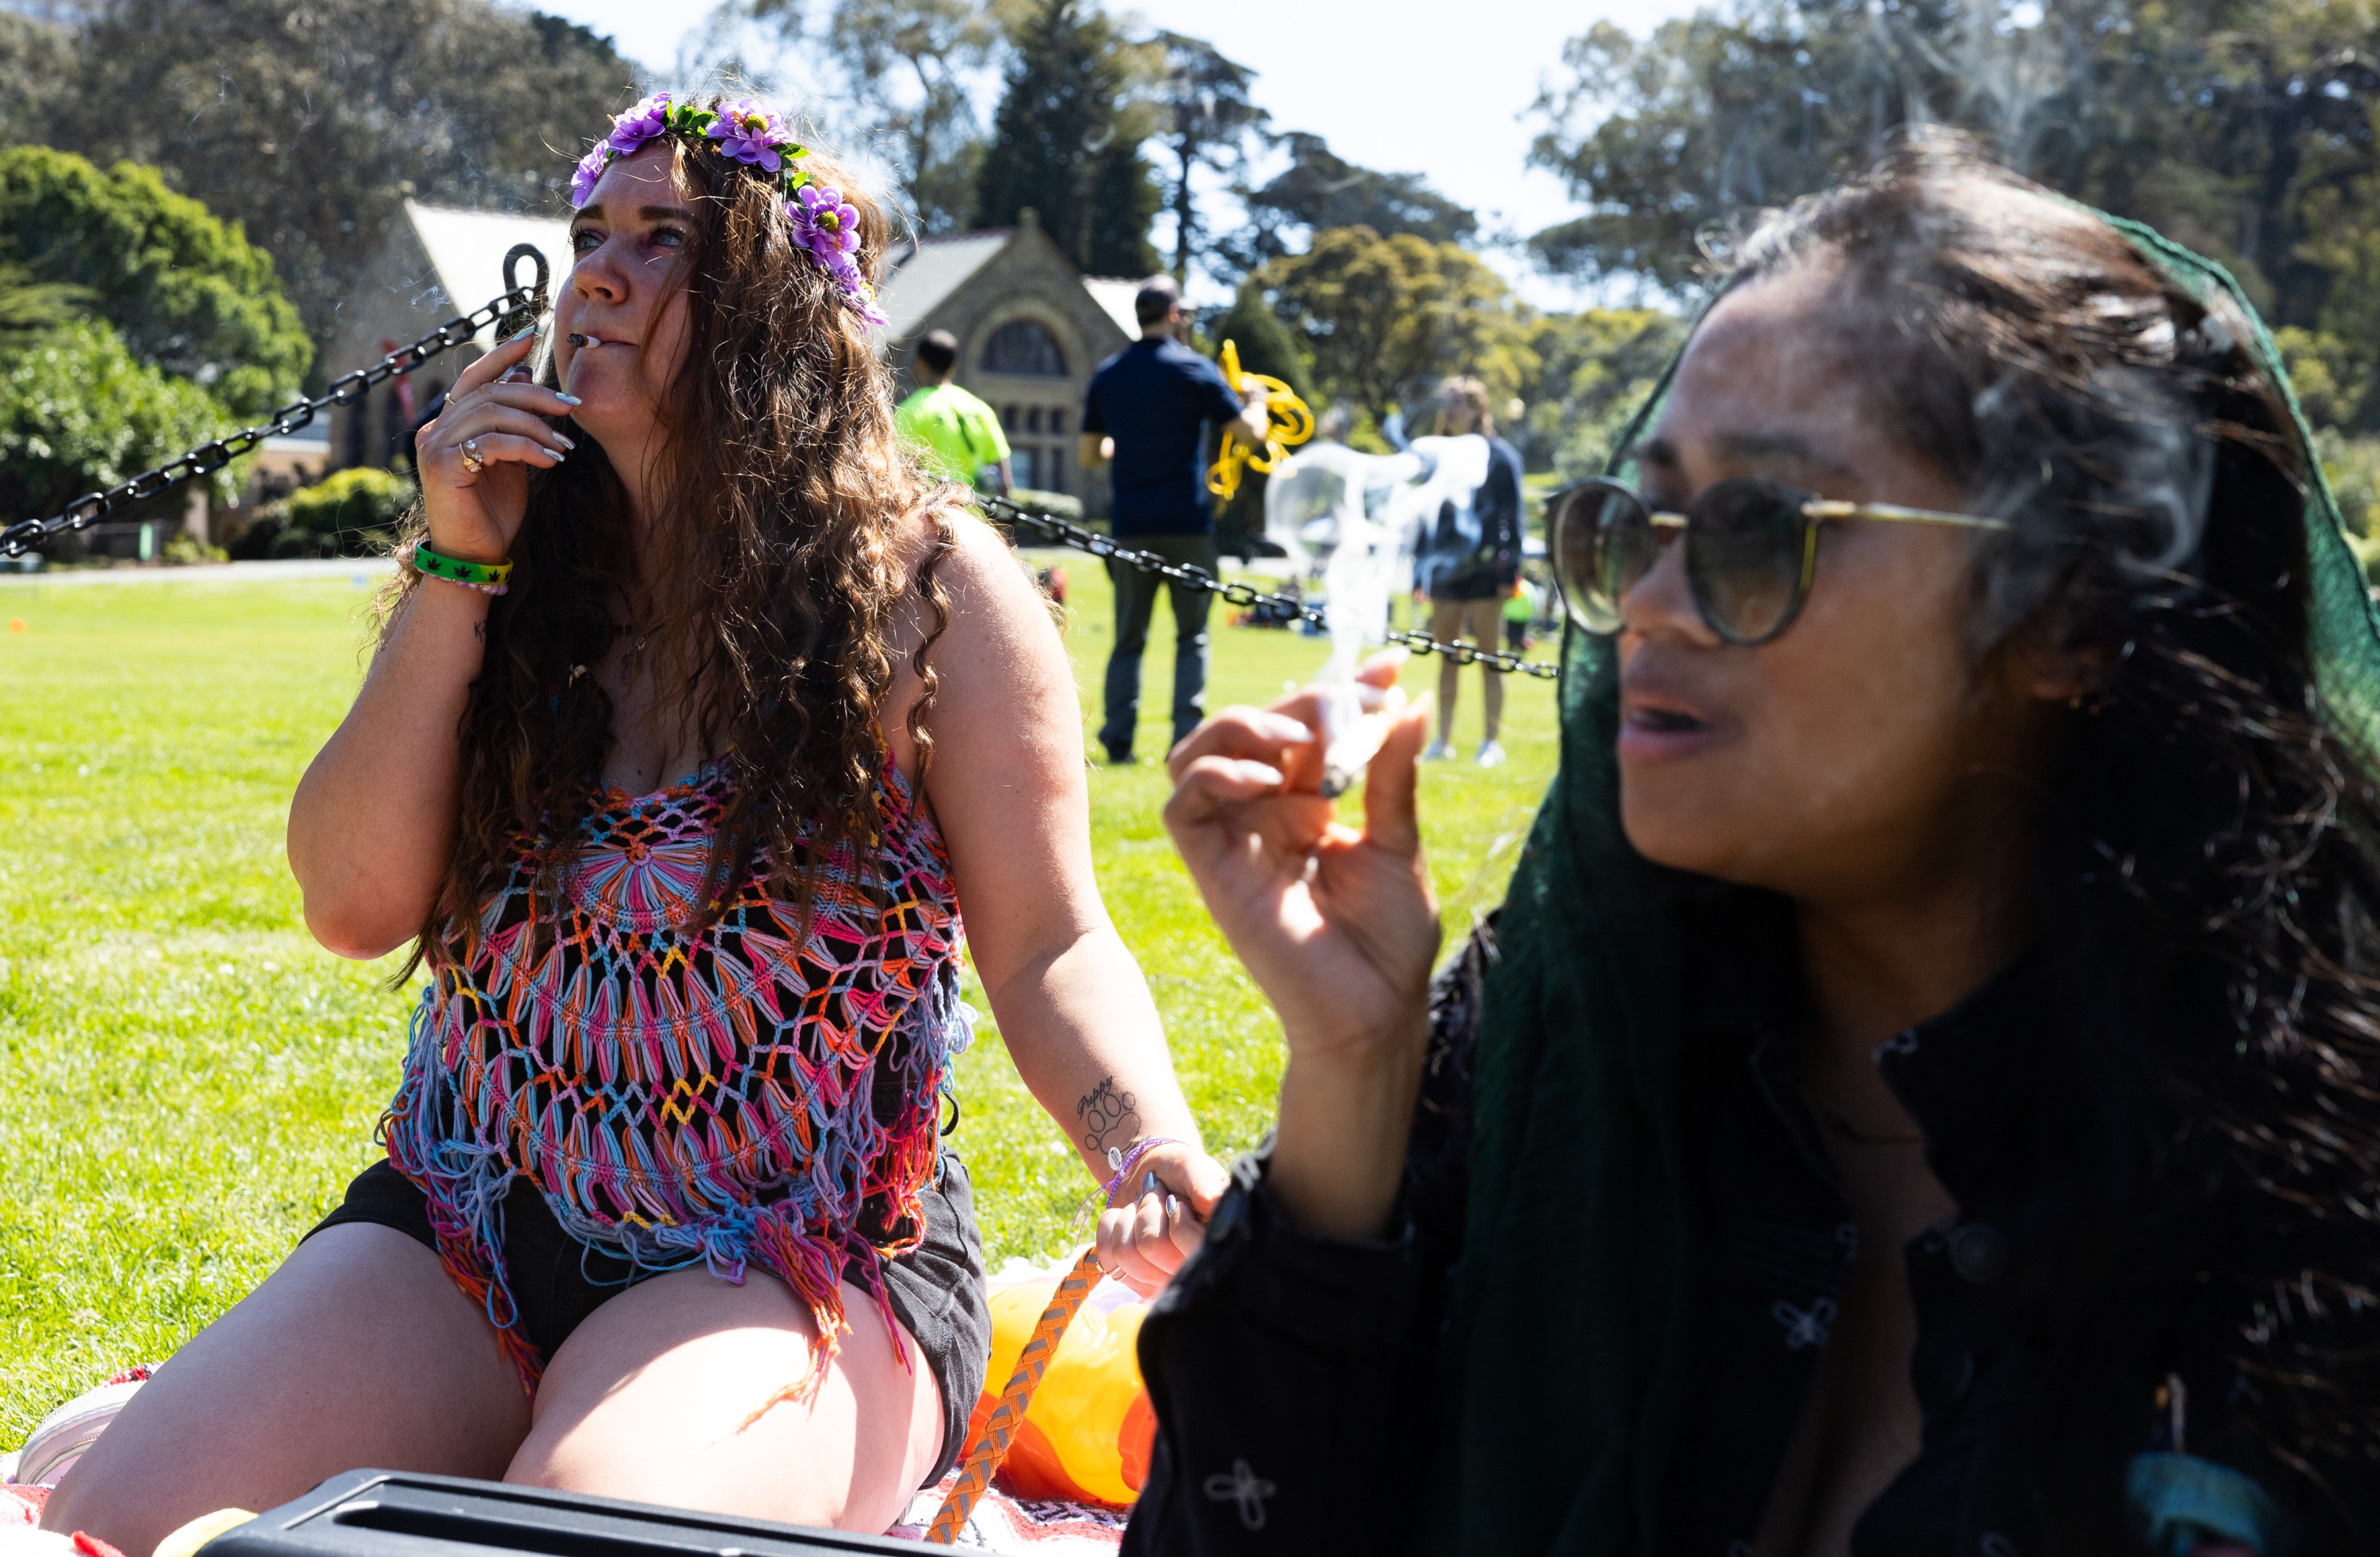 Two women sit on a sunny park lawn; one wears a flower crown and smokes, the other holds sunglasses and talks.